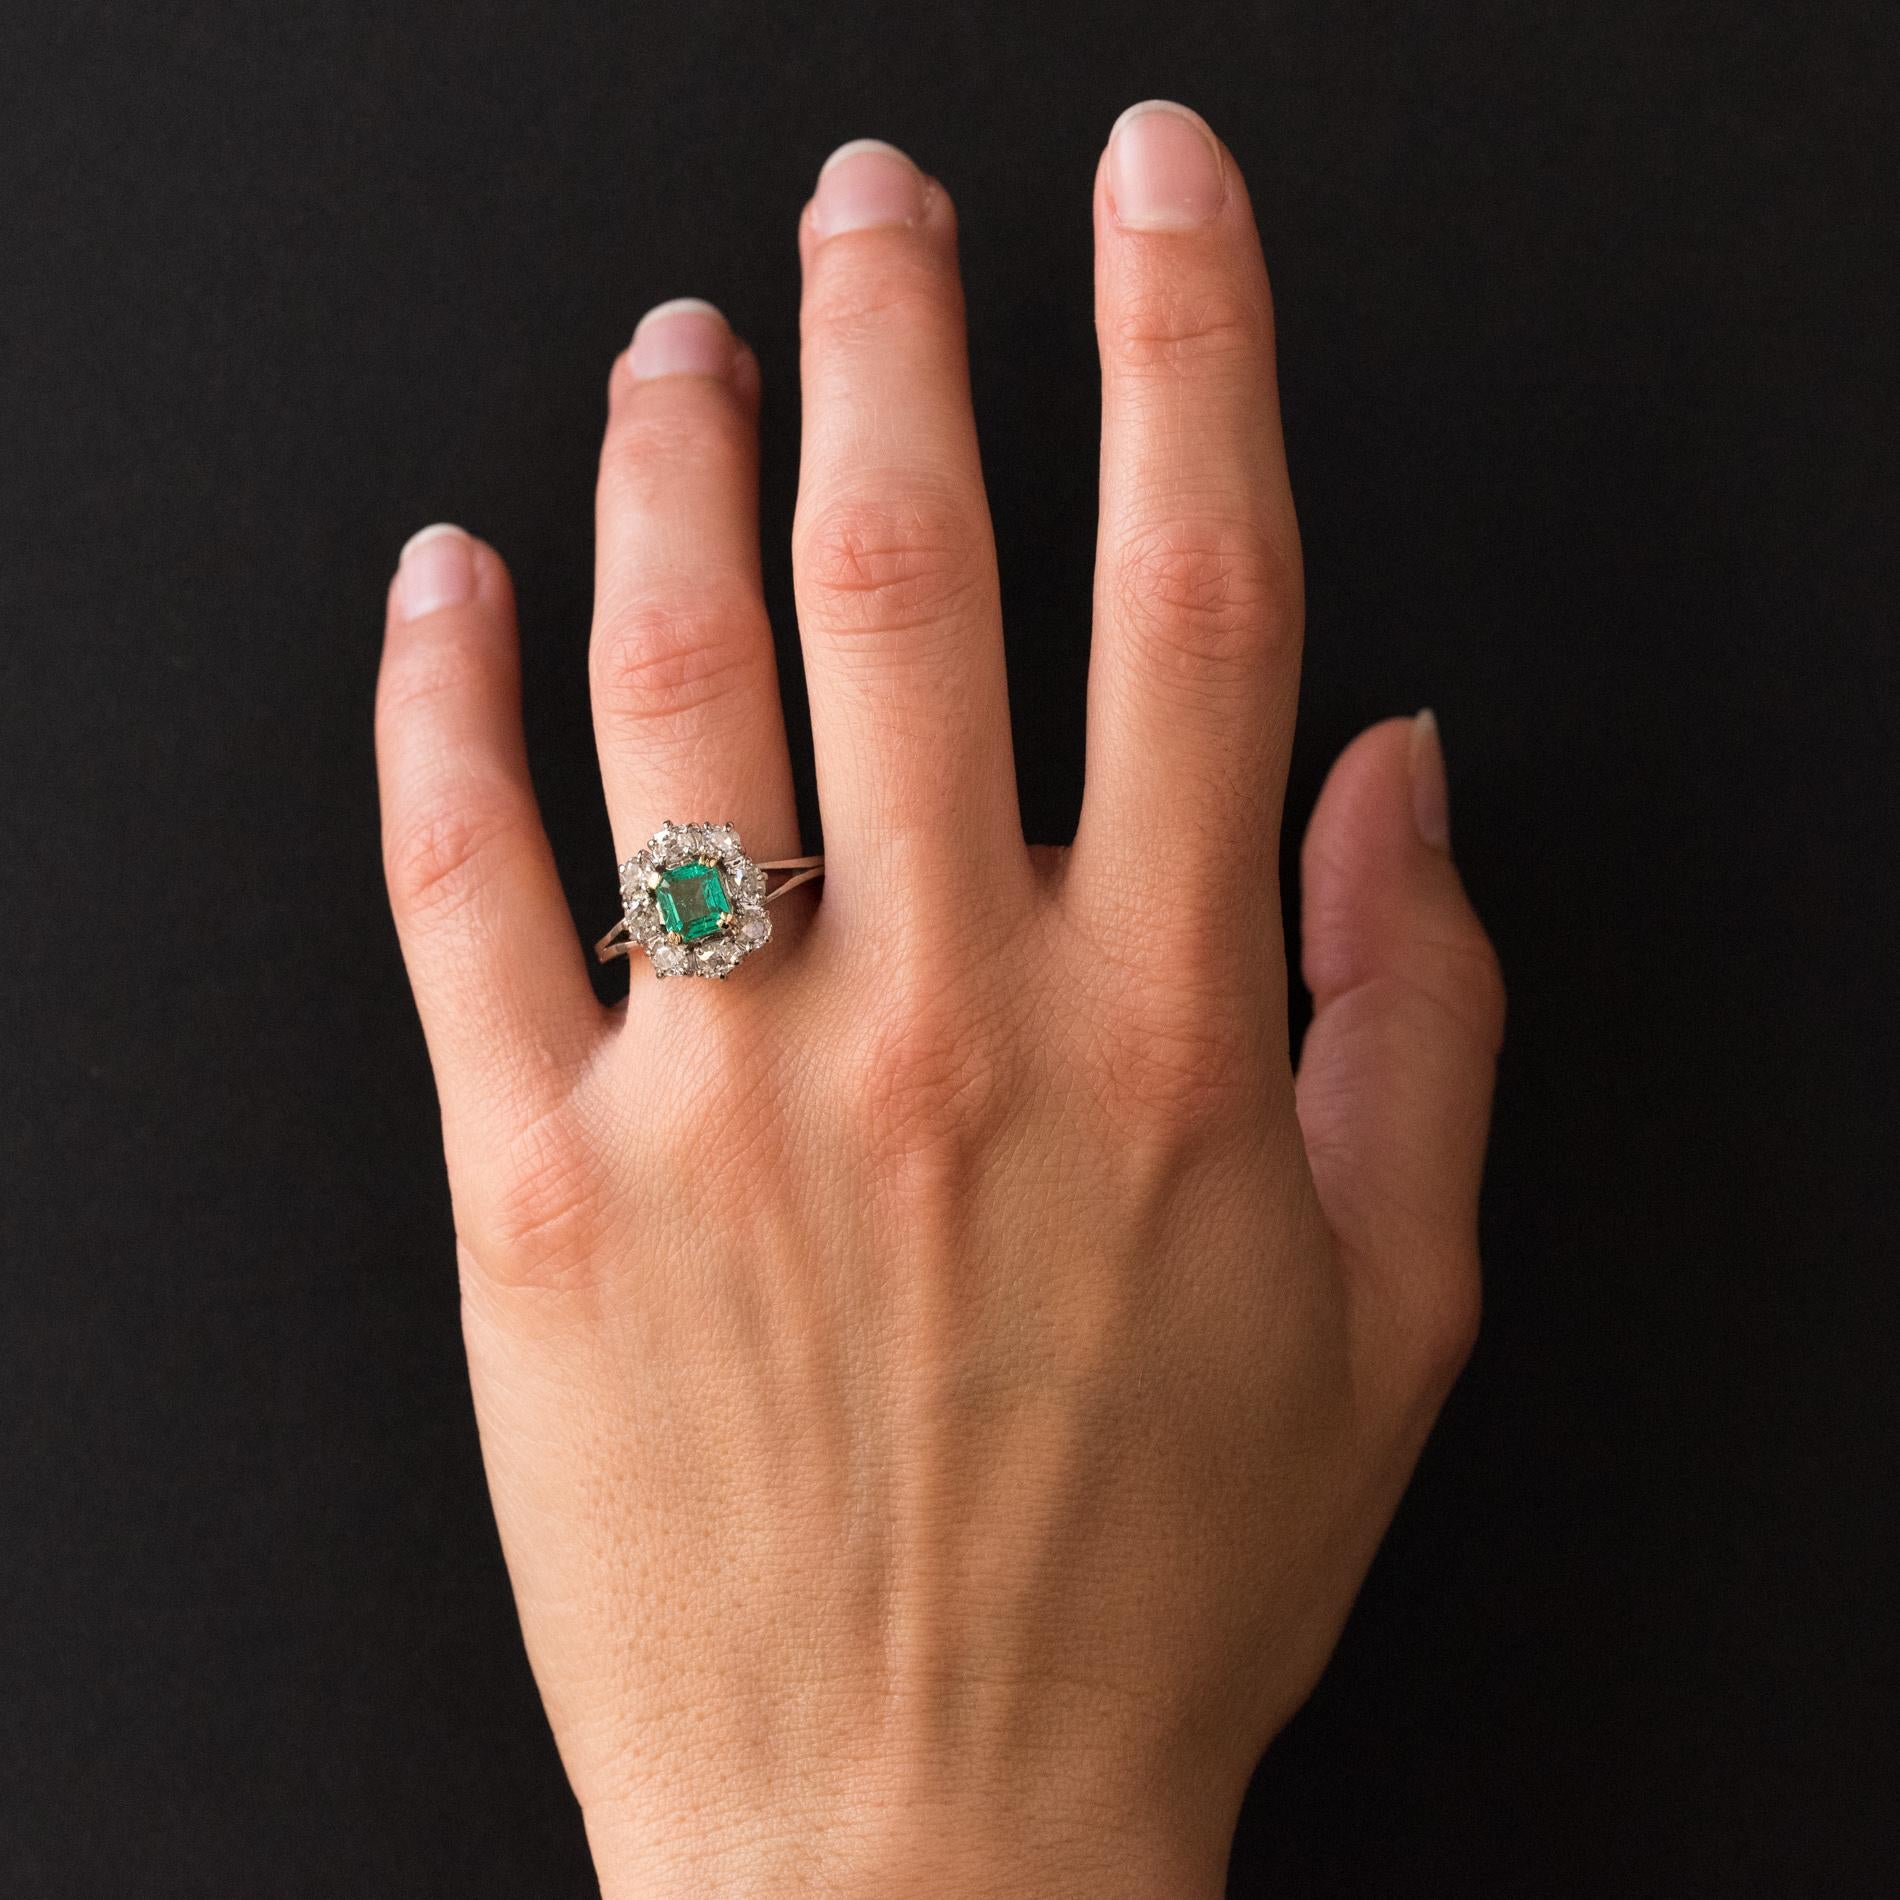 Ring in 18 karats white gold, eagle's head hallmark.
This splendid retro ring is adorned on its top thanks to 4 double claws, of an emerald surrounded by 8 antique-cut diamonds.
Total weight of the emerald: 0.93 carat approximately.
Total weight of